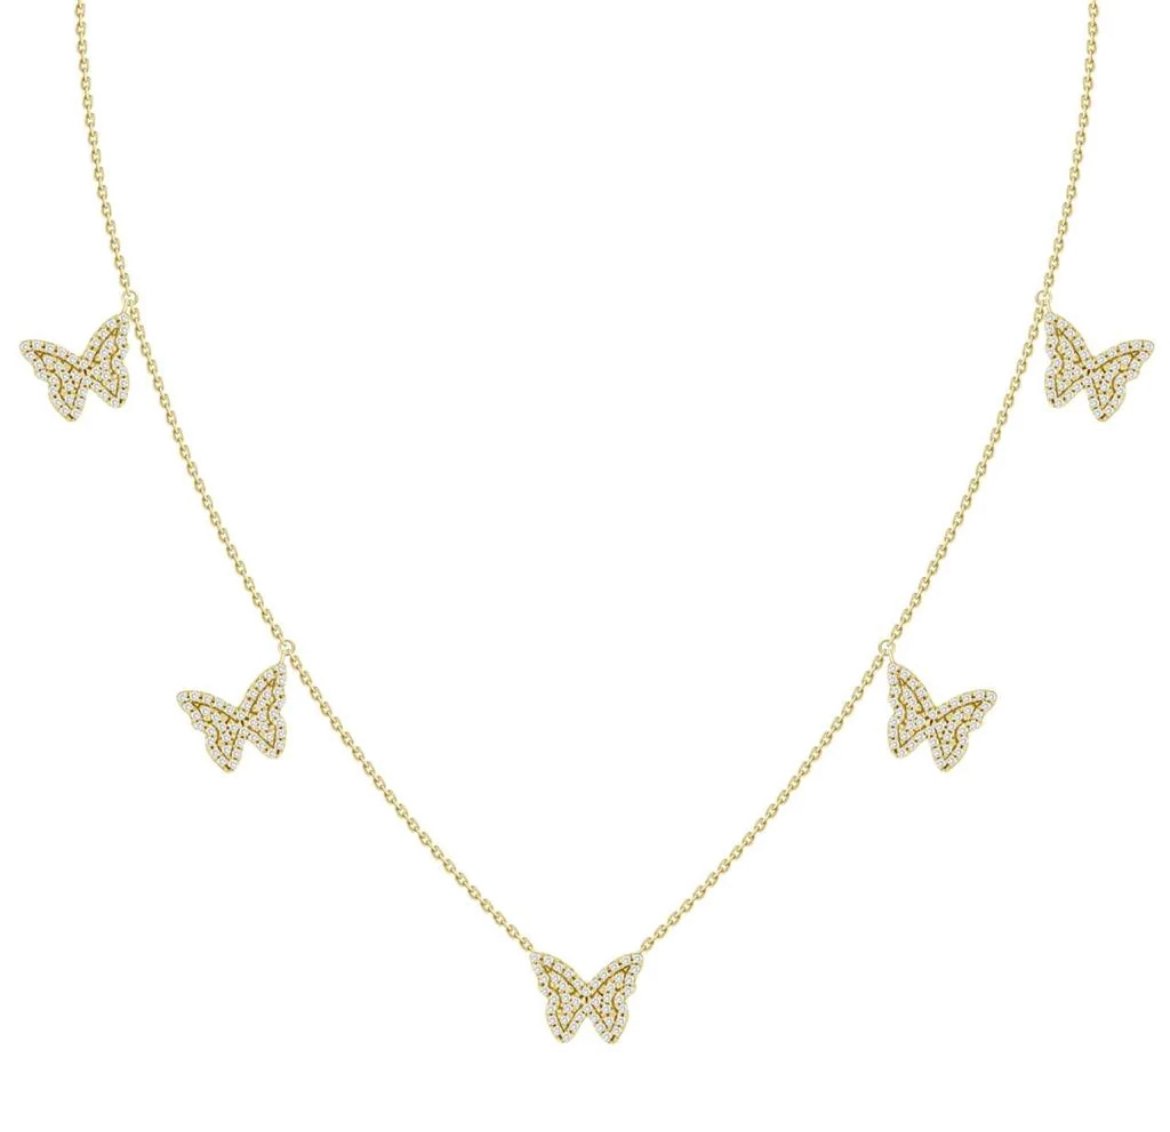 Pave Butterfly Necklace - Alexis Jae Jewelry